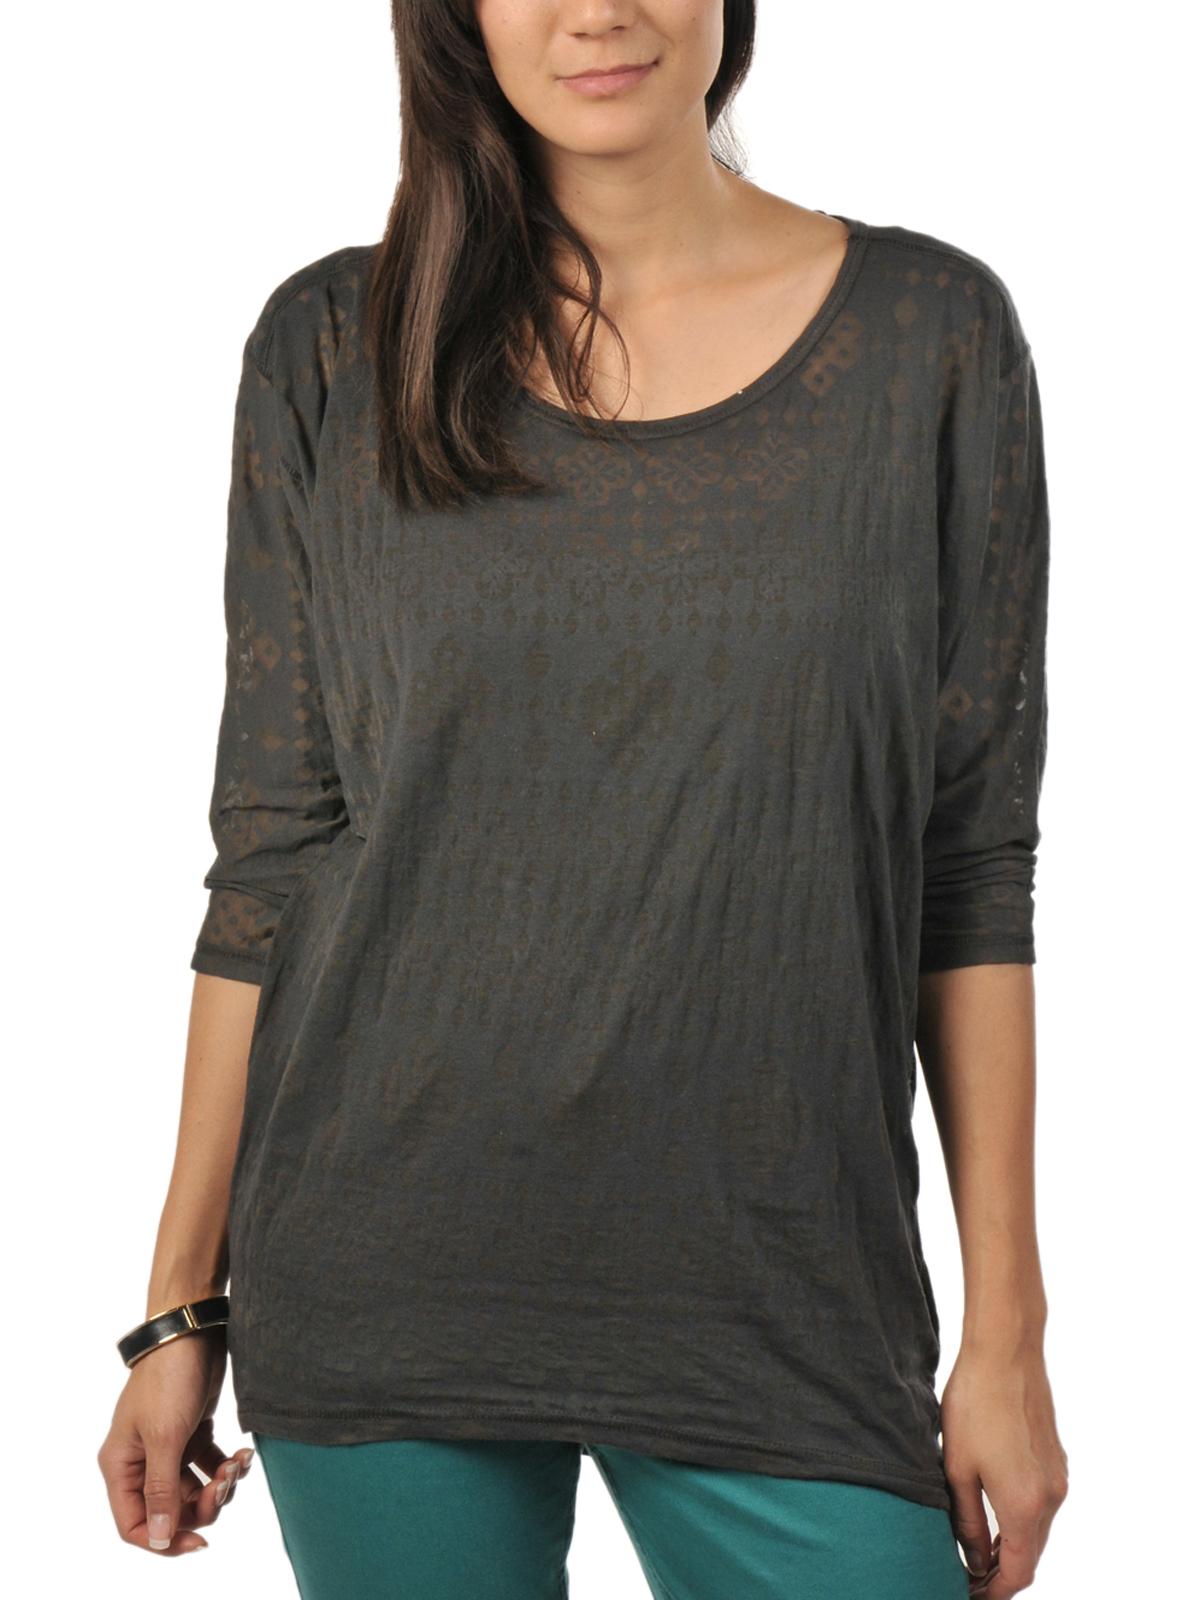 Foto Only Hippy Burn Out Long Boxy Camiseta 3/4 gris oscuro S foto 80712